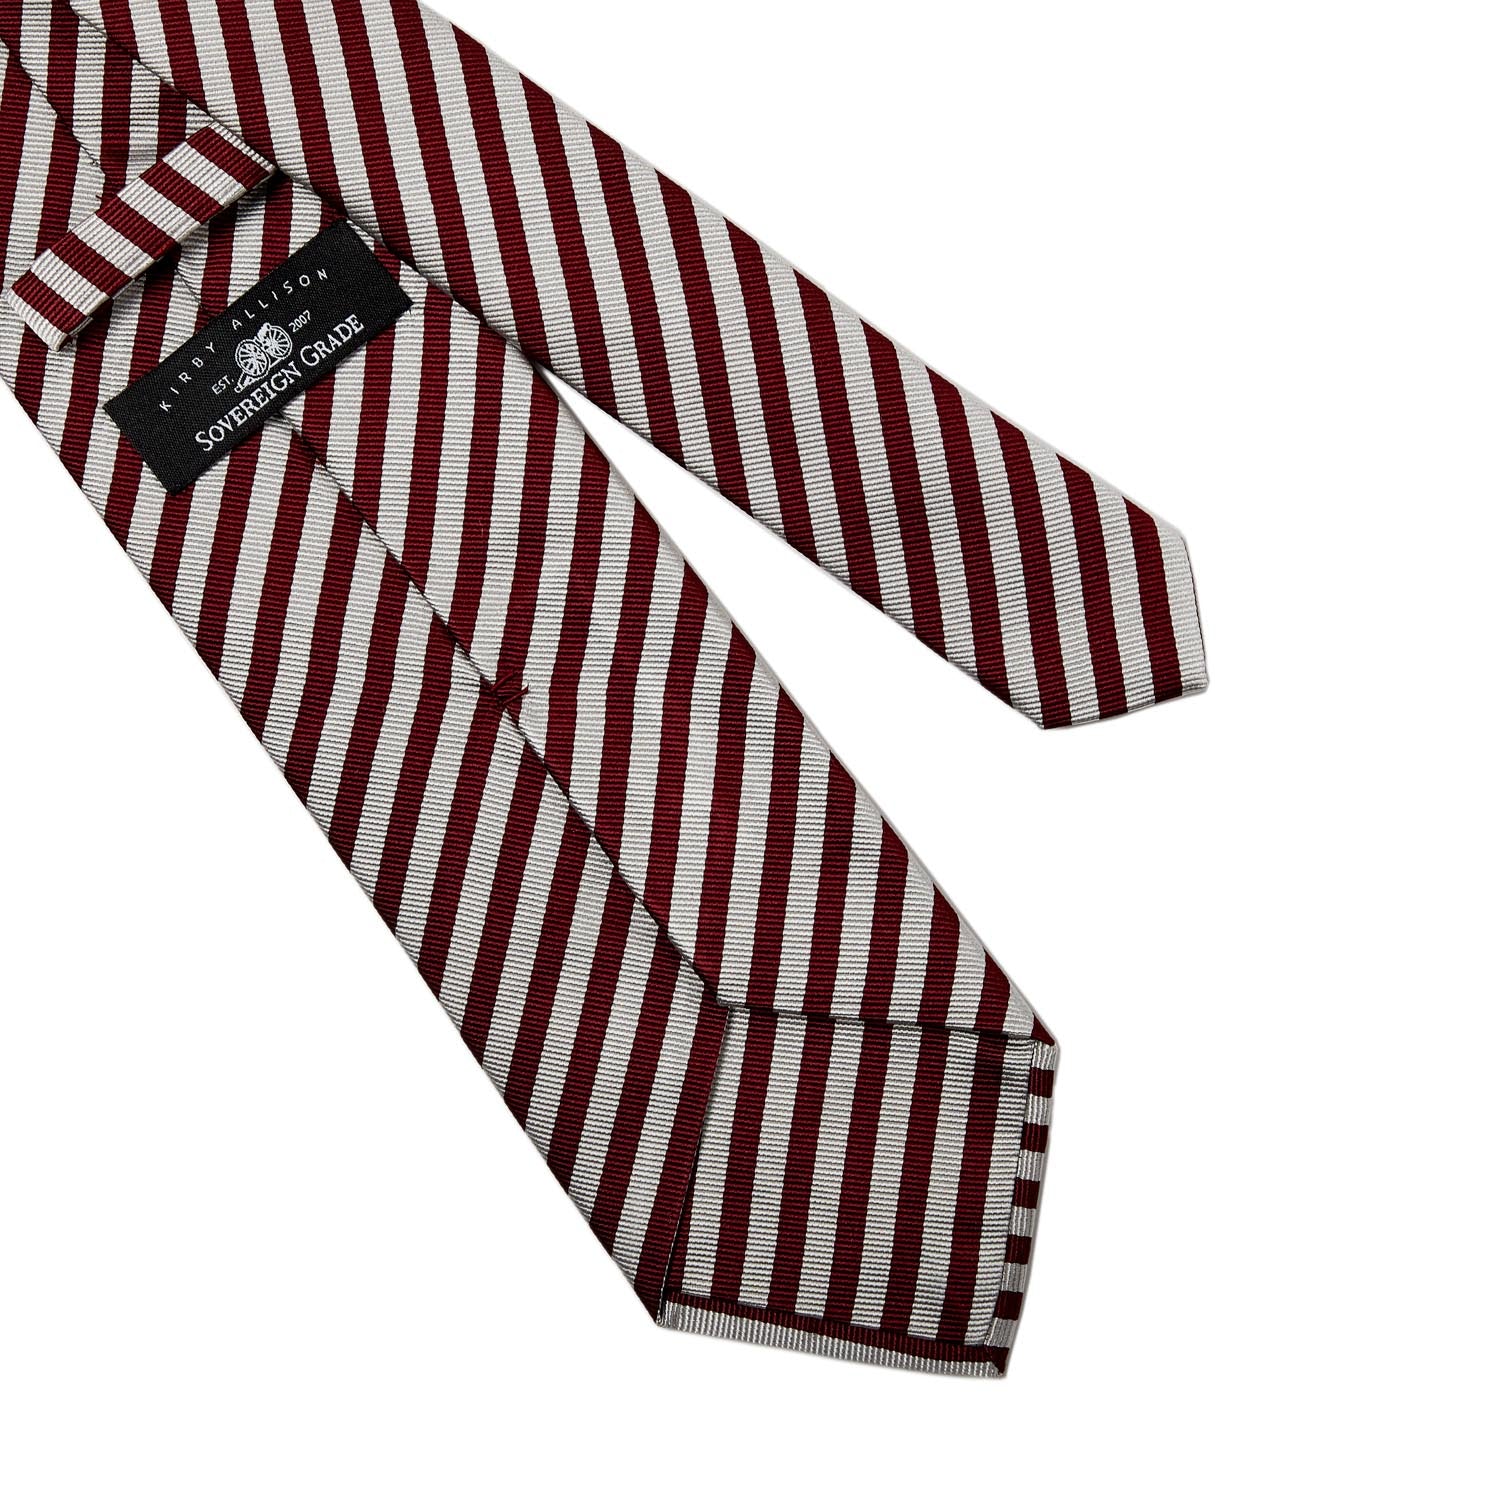 A Sovereign Grade KirbyAllison.com burgundy and silver London stripe silk tie handmade in the United Kingdom, showcased on a white background.